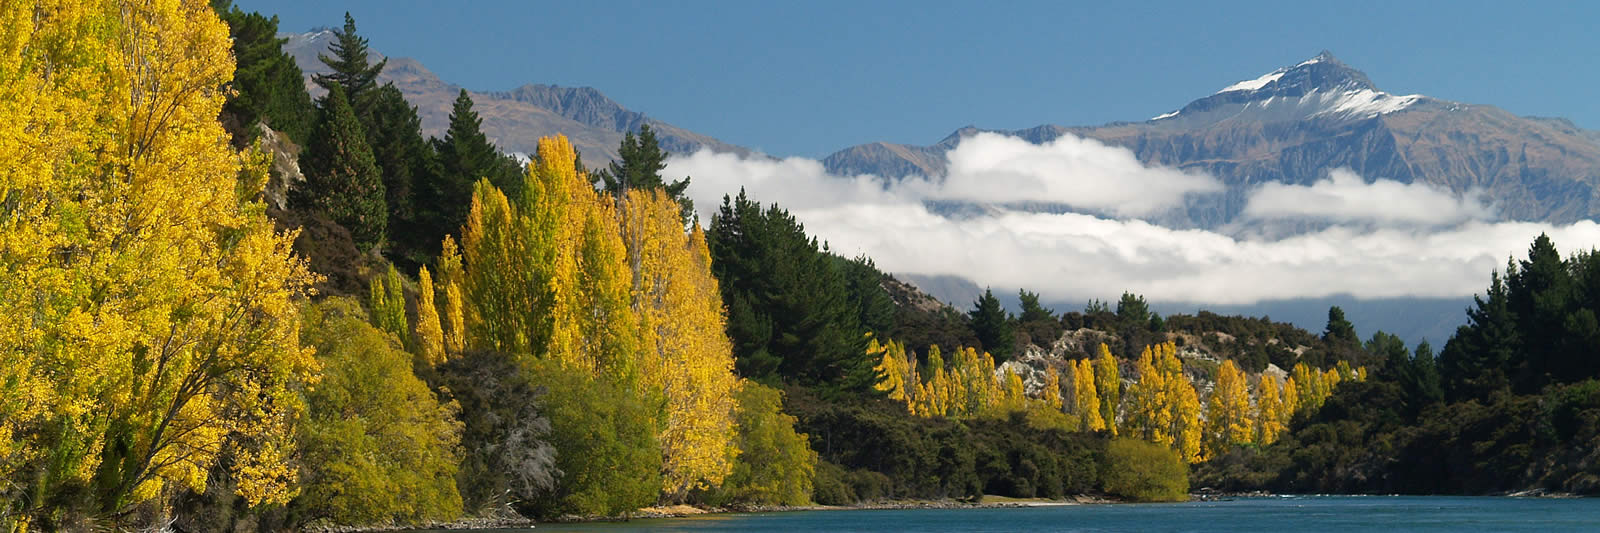 Outlet Track views on Eco Wanaka Guided Walks